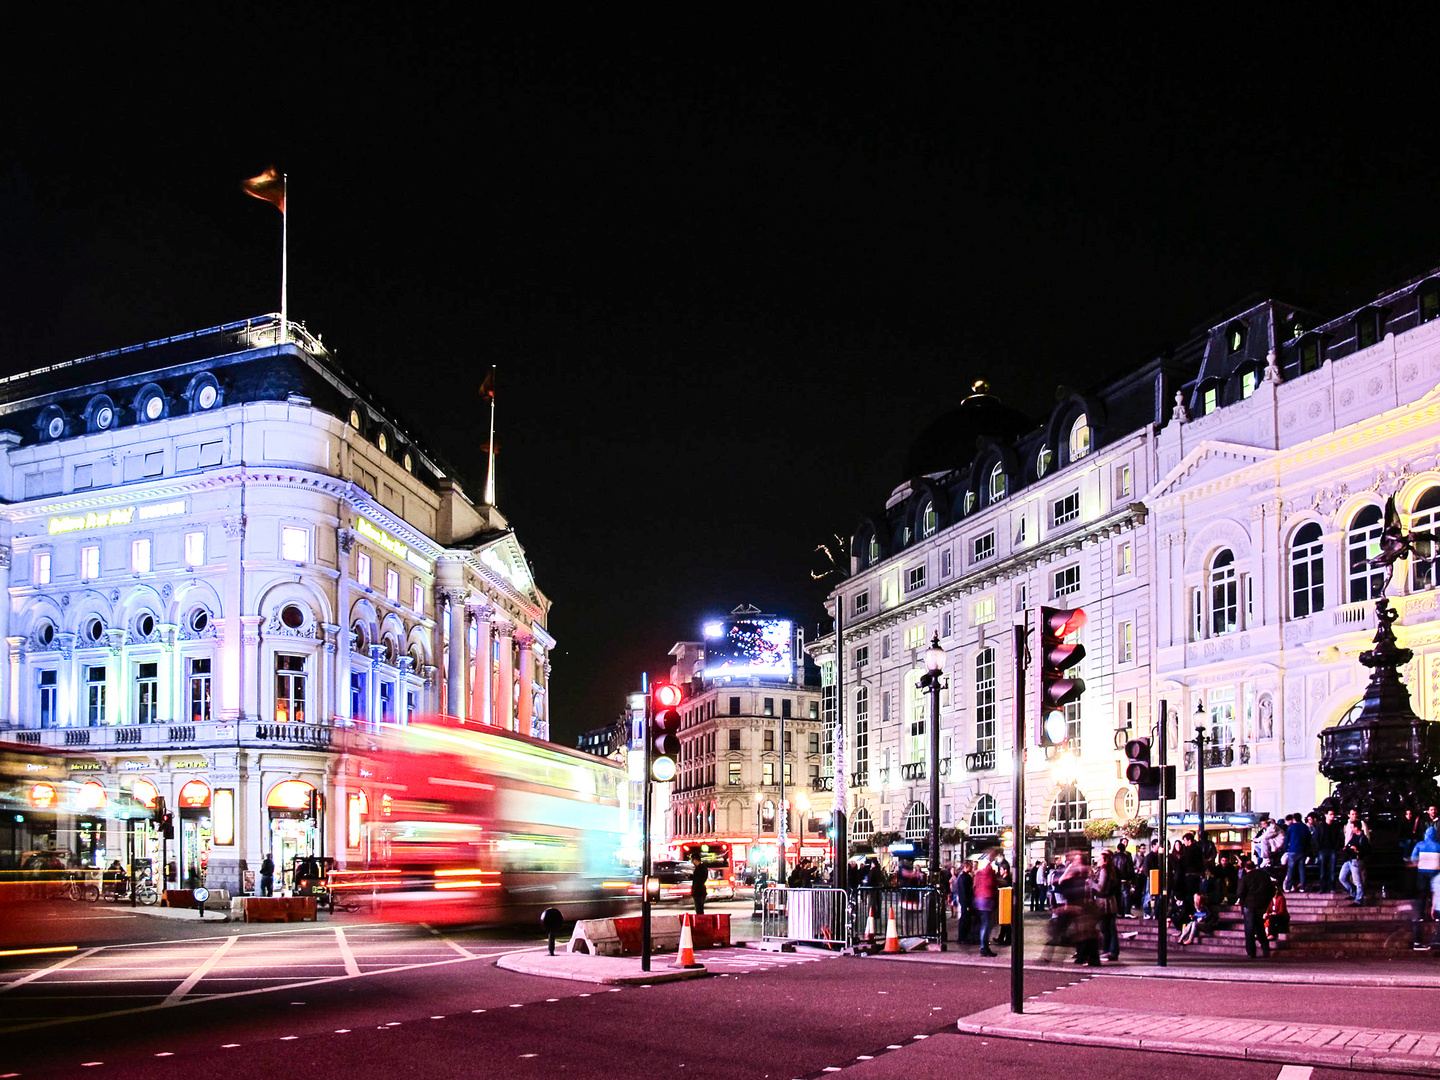 Nightlife at Piccadilly Circus